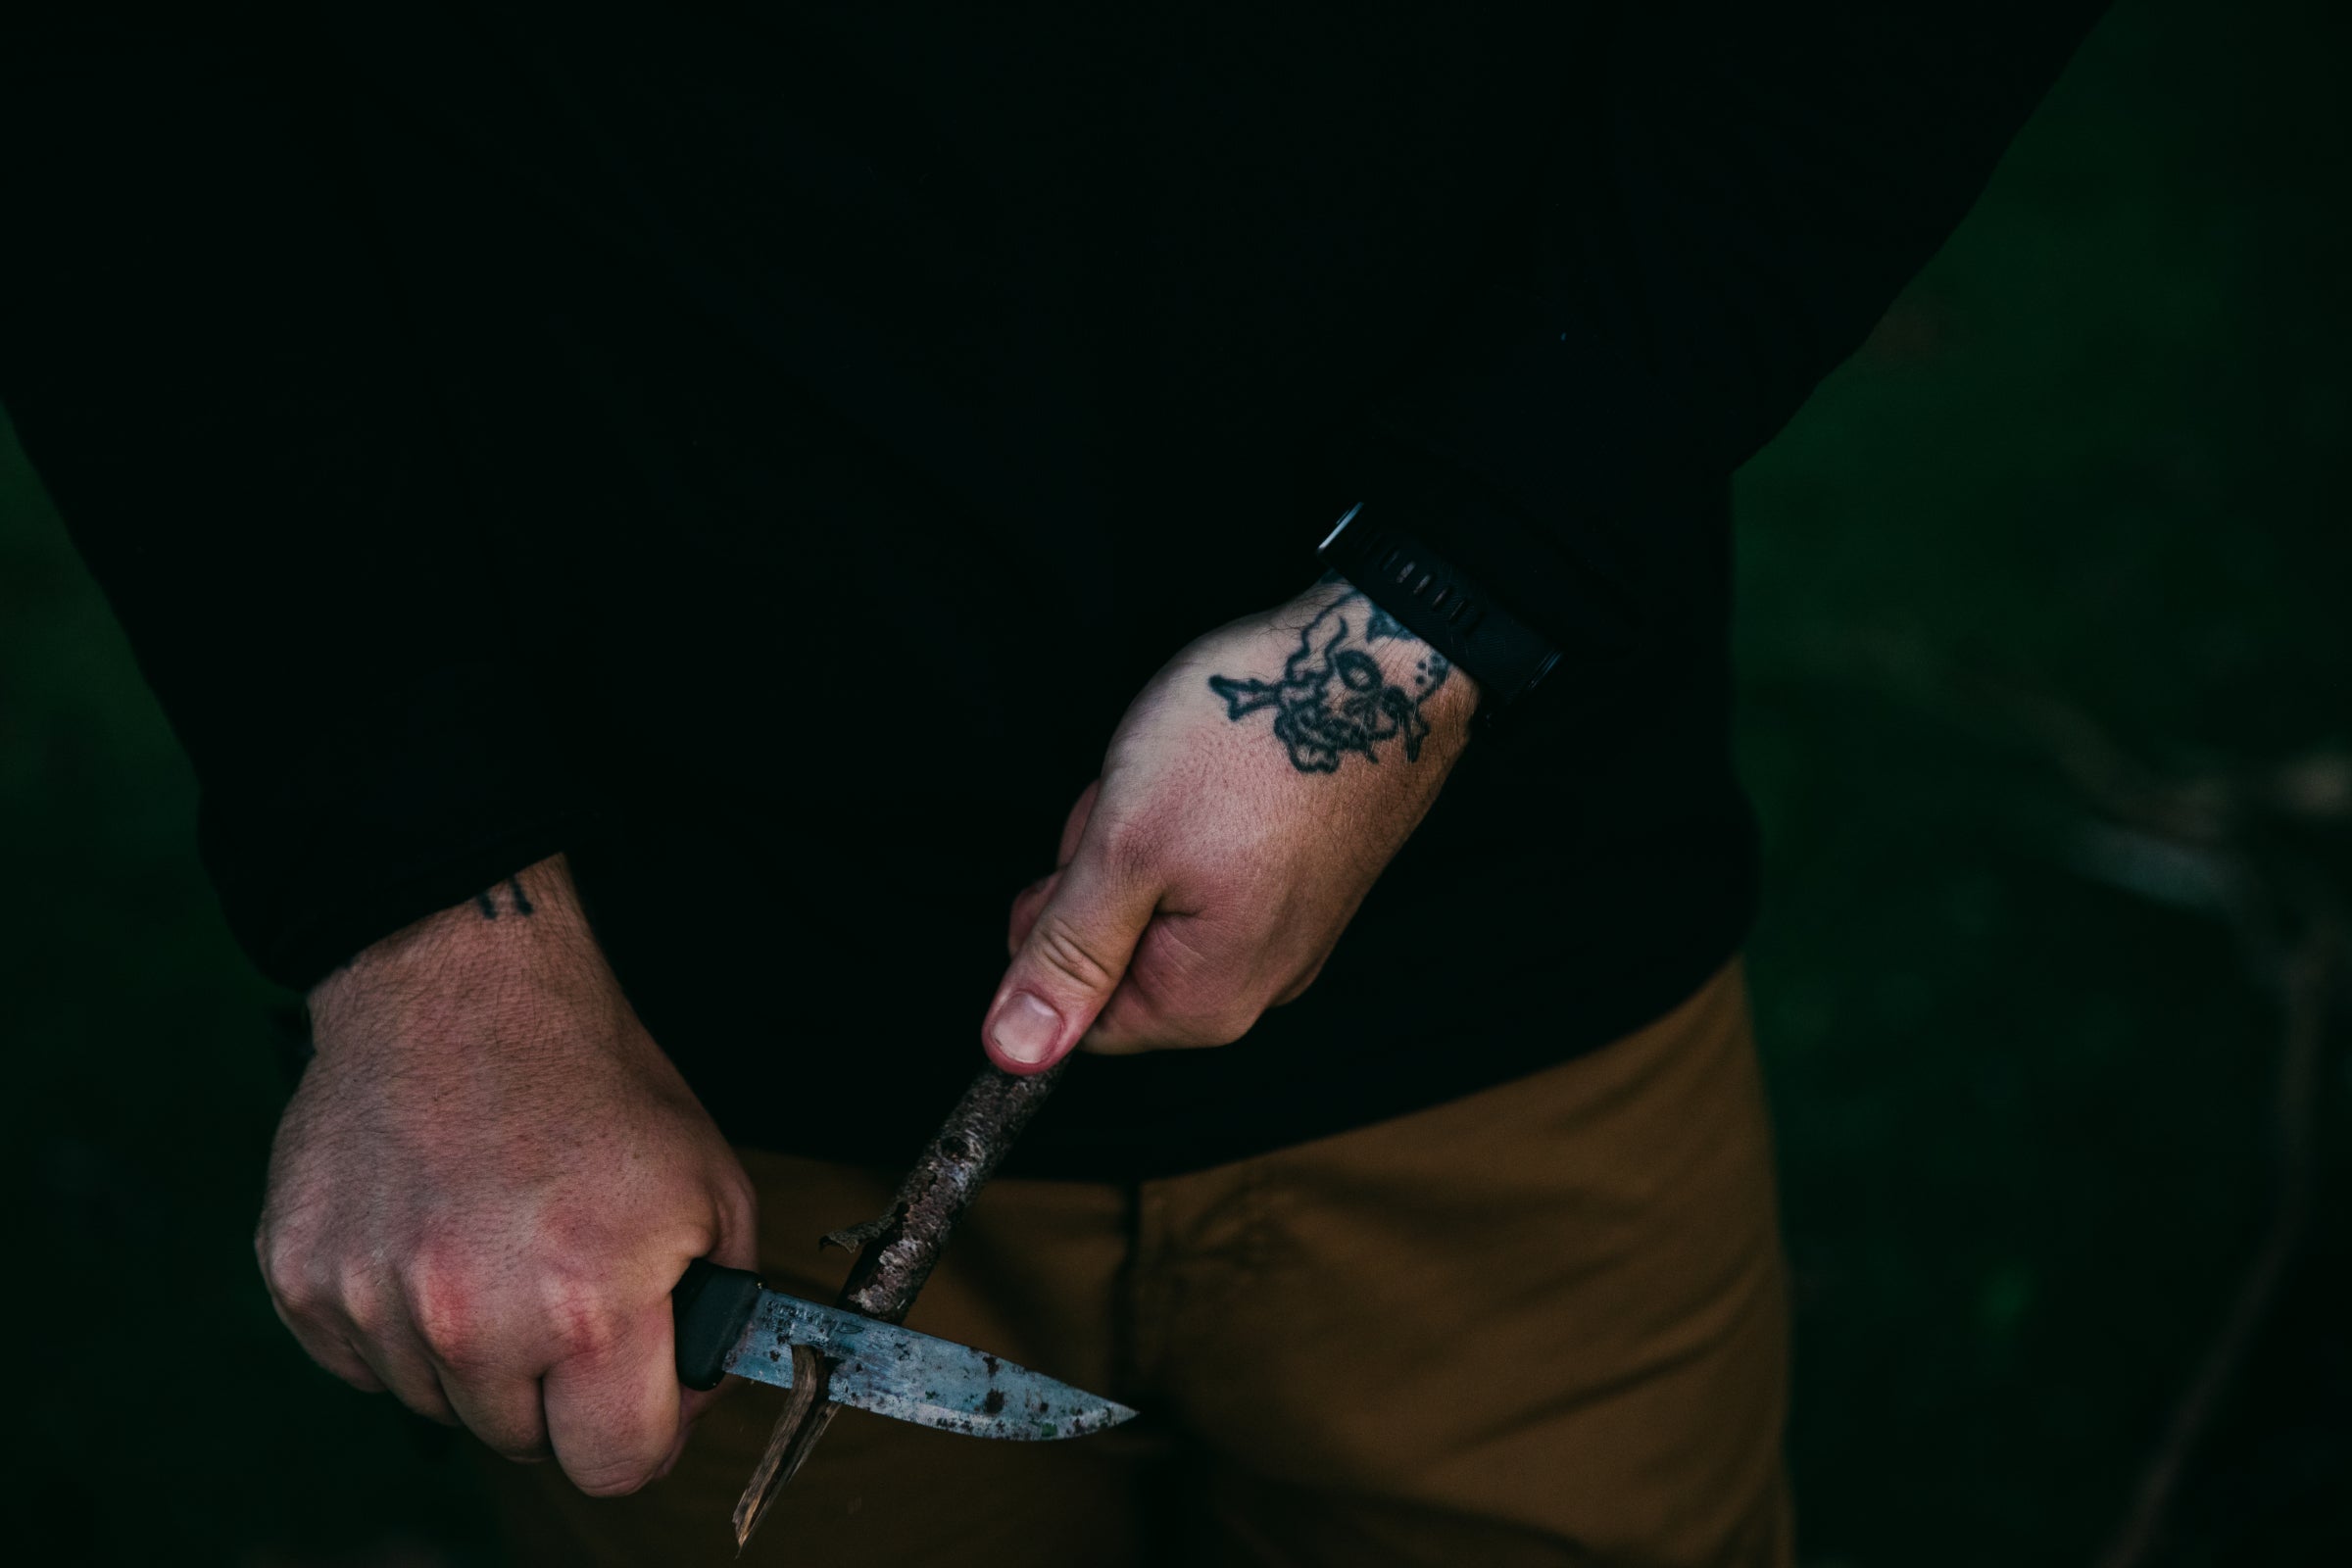 Millican | A person in dark clothing is carving a piece of wood with a knife. The individual's wrist displays a tattoo of a skull with a mustache, and they are wearing a black watch.